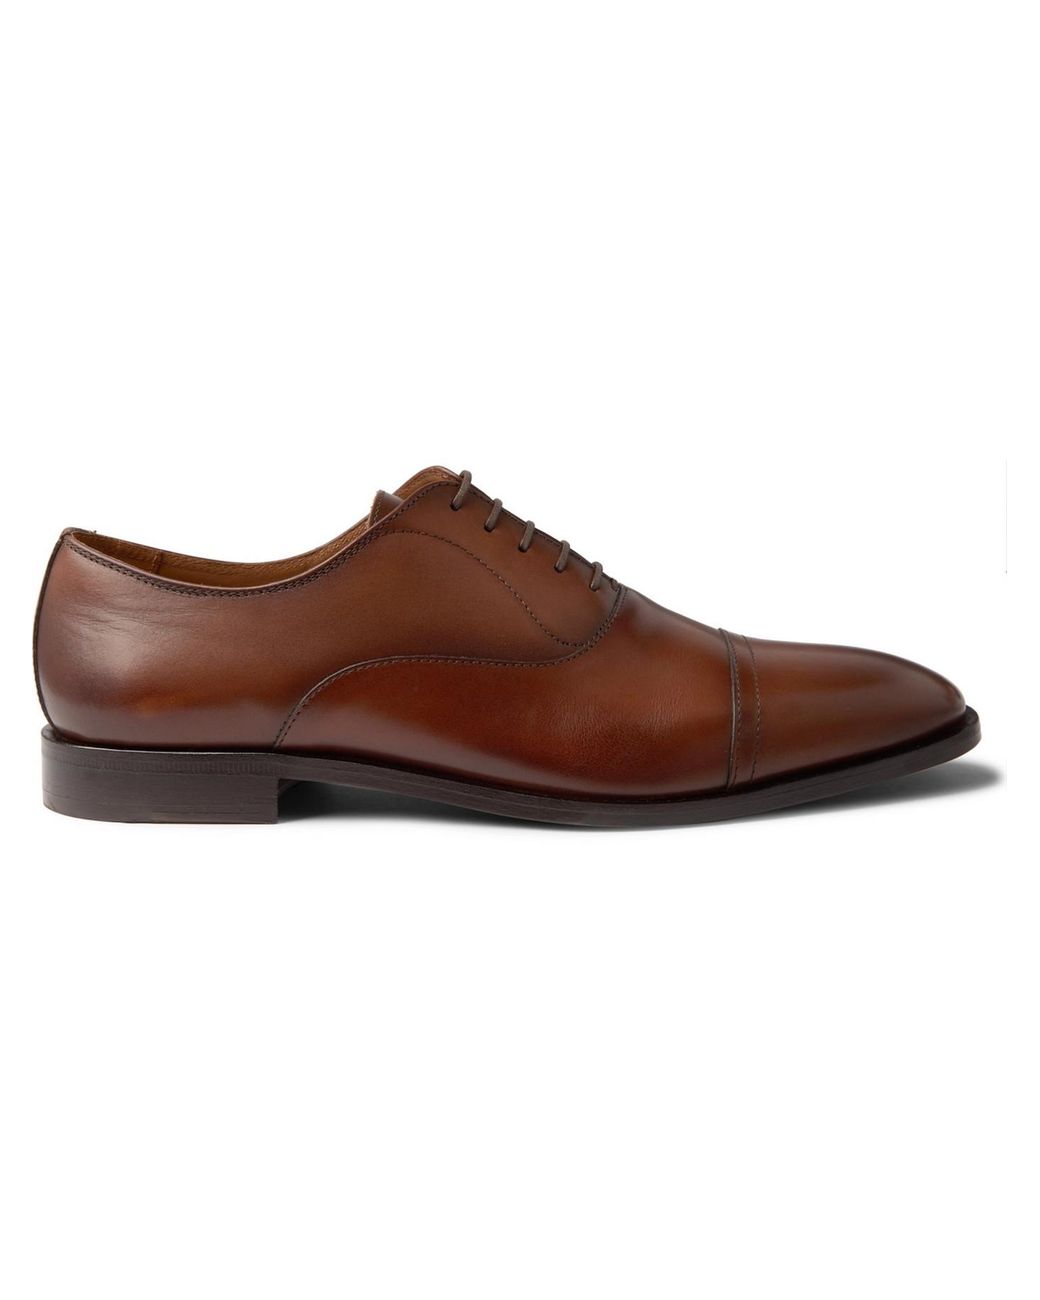 BOSS by HUGO BOSS Lisbon Lace Up Shoes in Brown for Men Mens Shoes Lace-ups Oxford shoes 